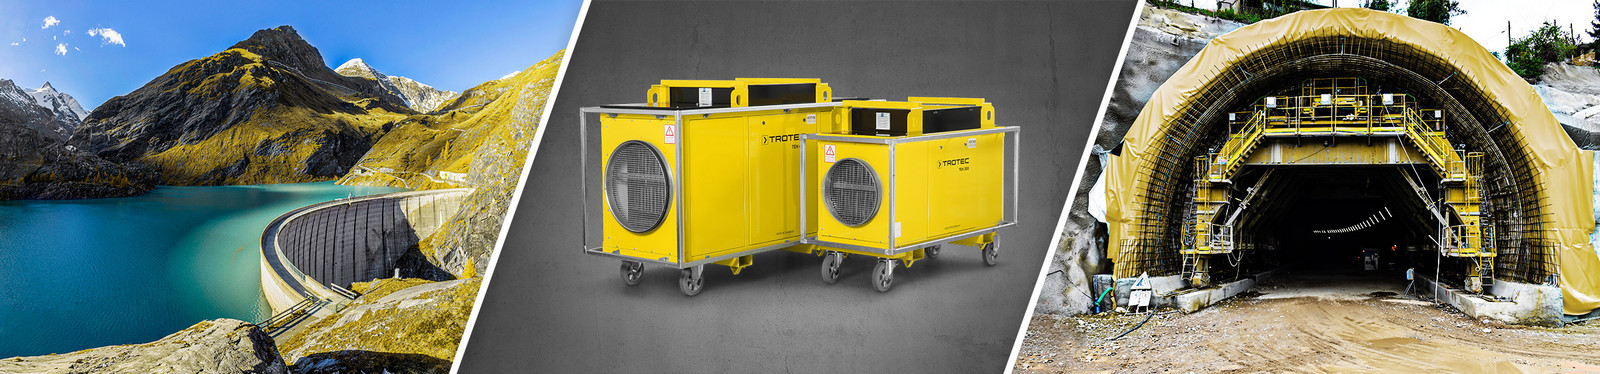 Mobile heating for large construction sites